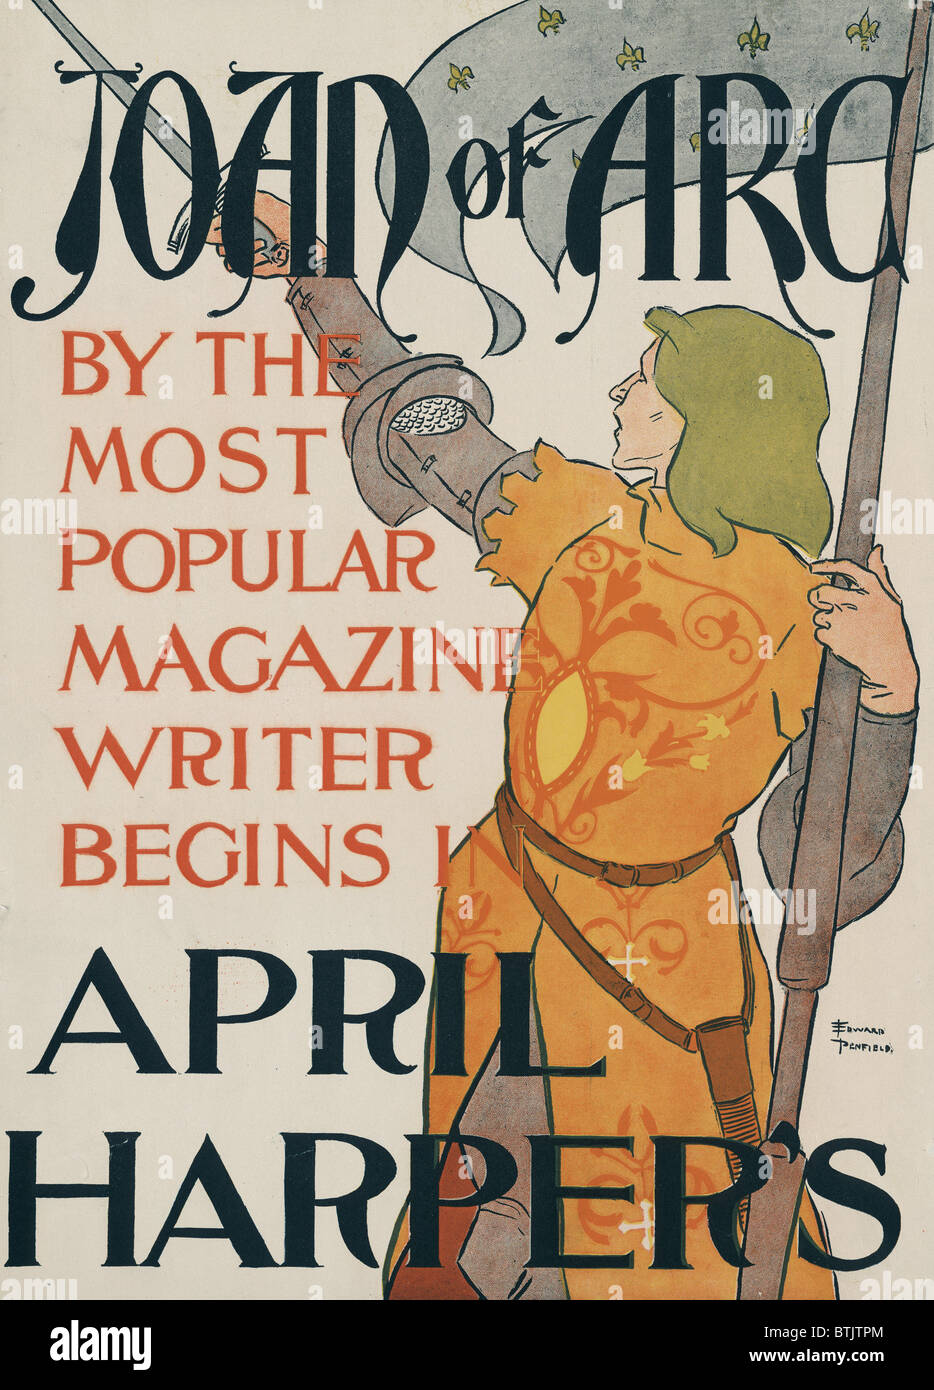 Poster for Harper's magazine showing Joan of Arc holding a flag in one hand and pointing her sword with the other, caption reads: 'by the most popular magazine writer, begins in April Harper's', illustration by Edward Penfield, circa 1895. Stock Photo